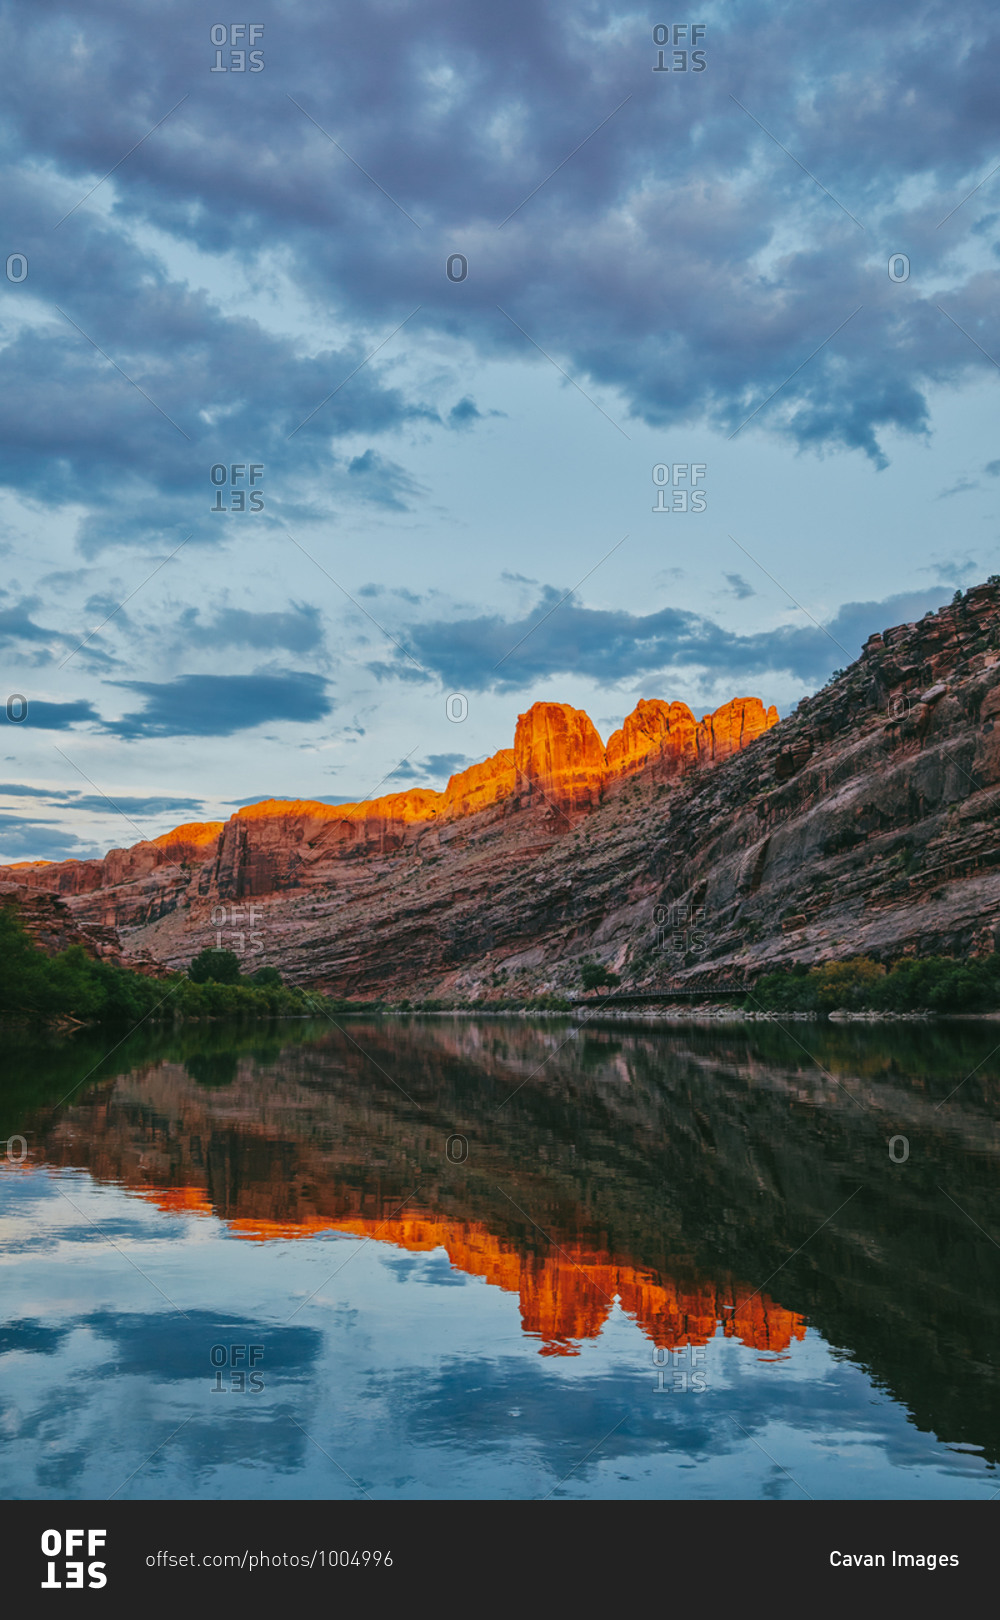 Sunset over mountain by Colorado River in Moab, Utah.